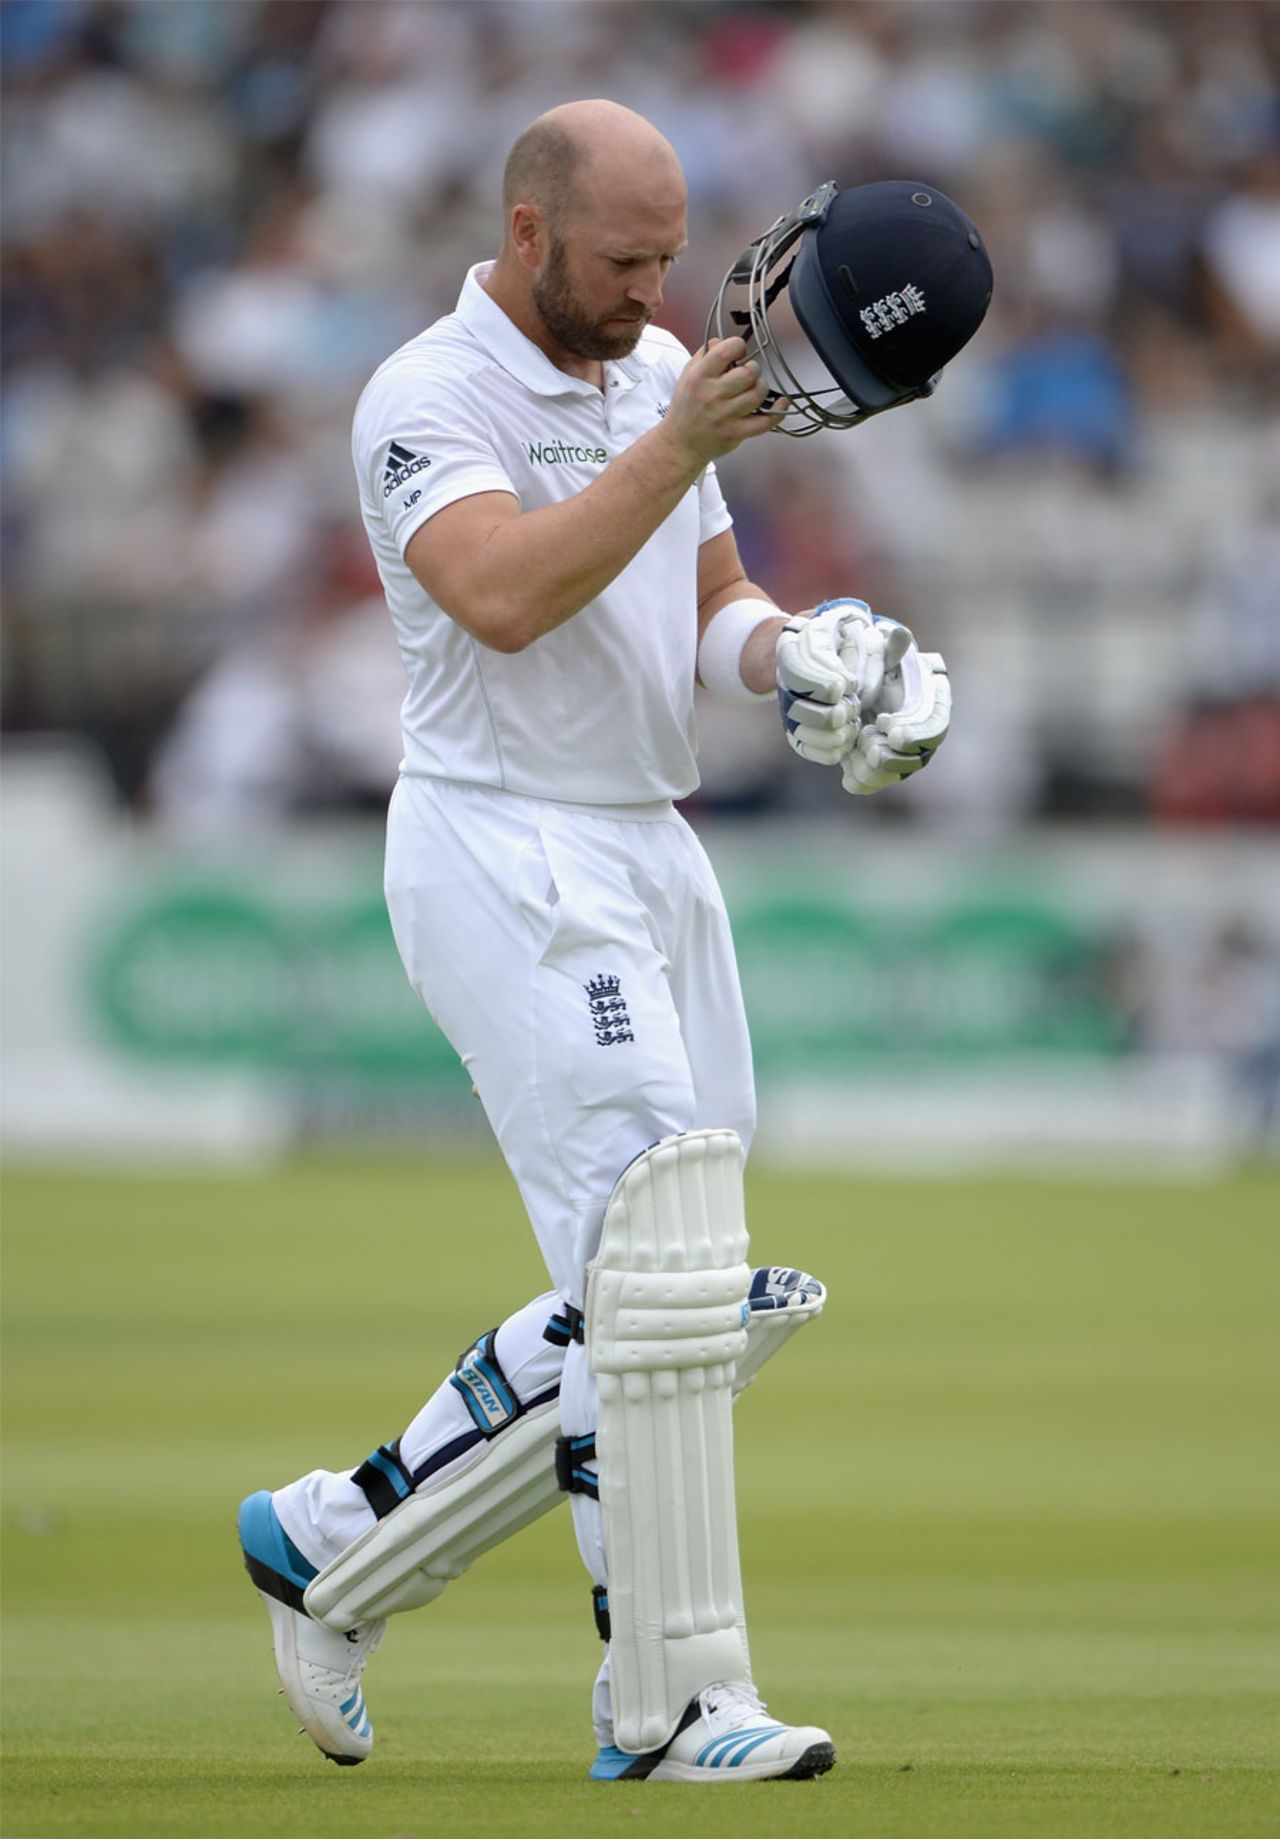 Matt Prior trudges off the field after holing out in the deep, England v India, 2nd Investec Test, Lord's, 5th day, July 21, 2014